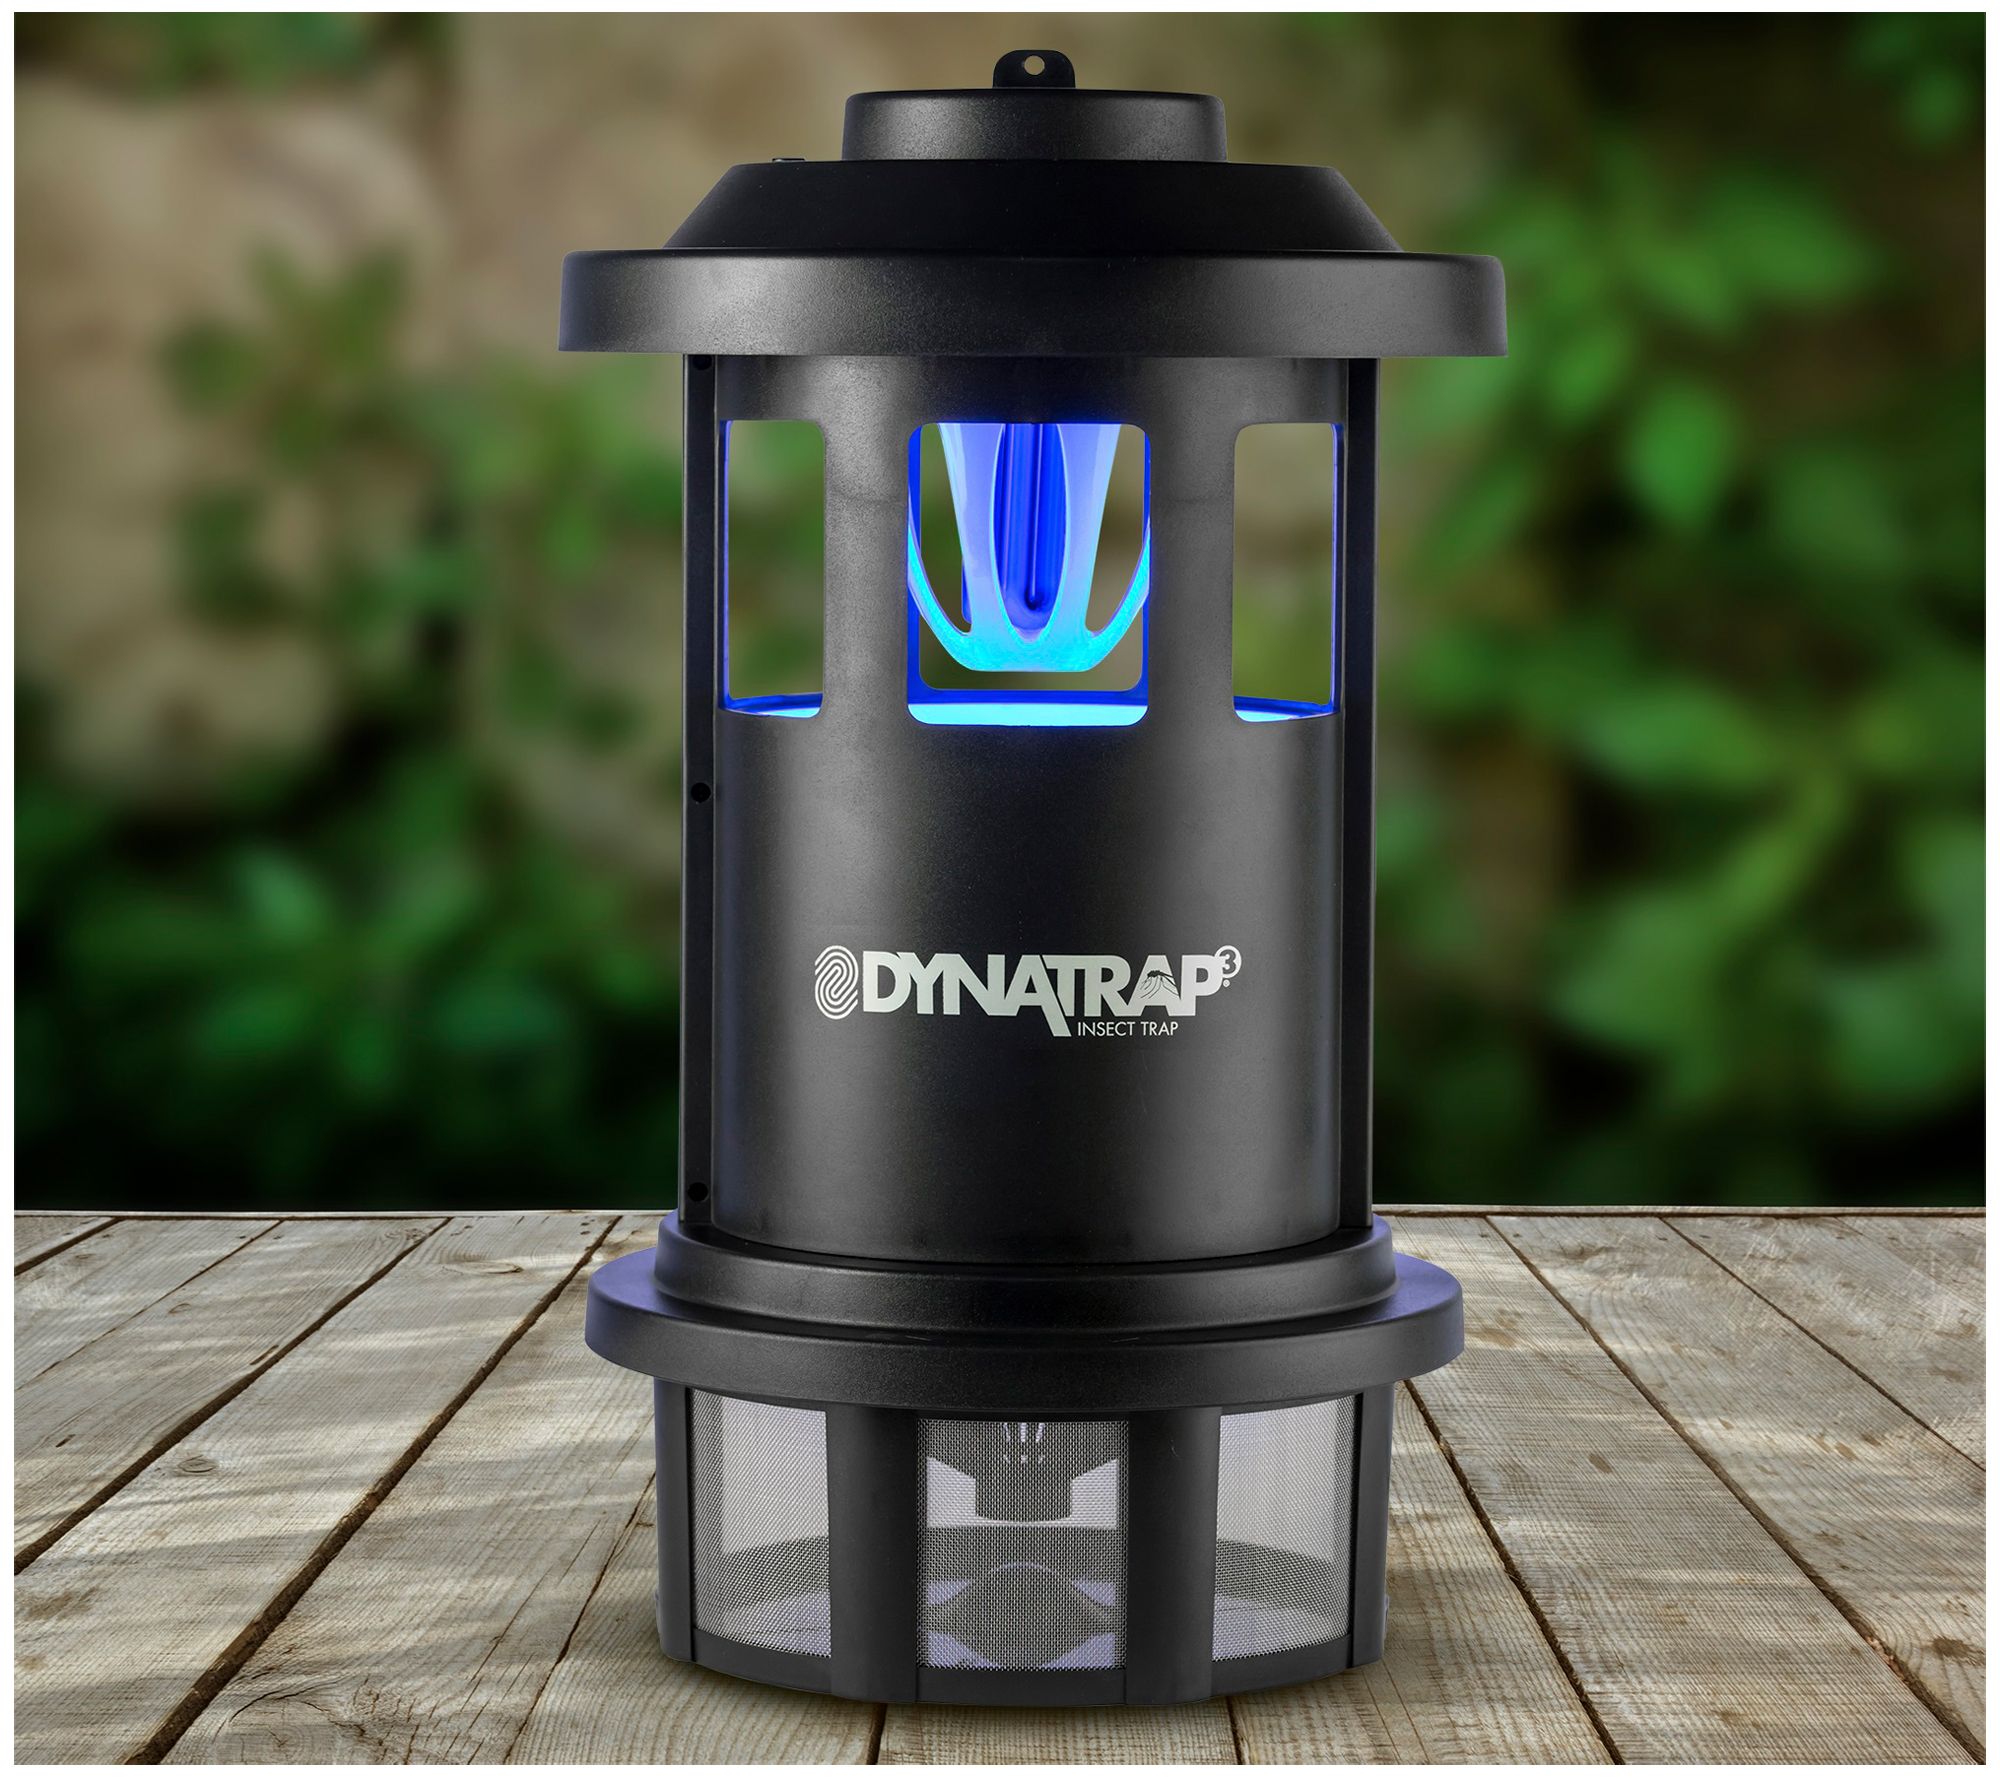 DynaTrap 3 Indoor Insect Trap